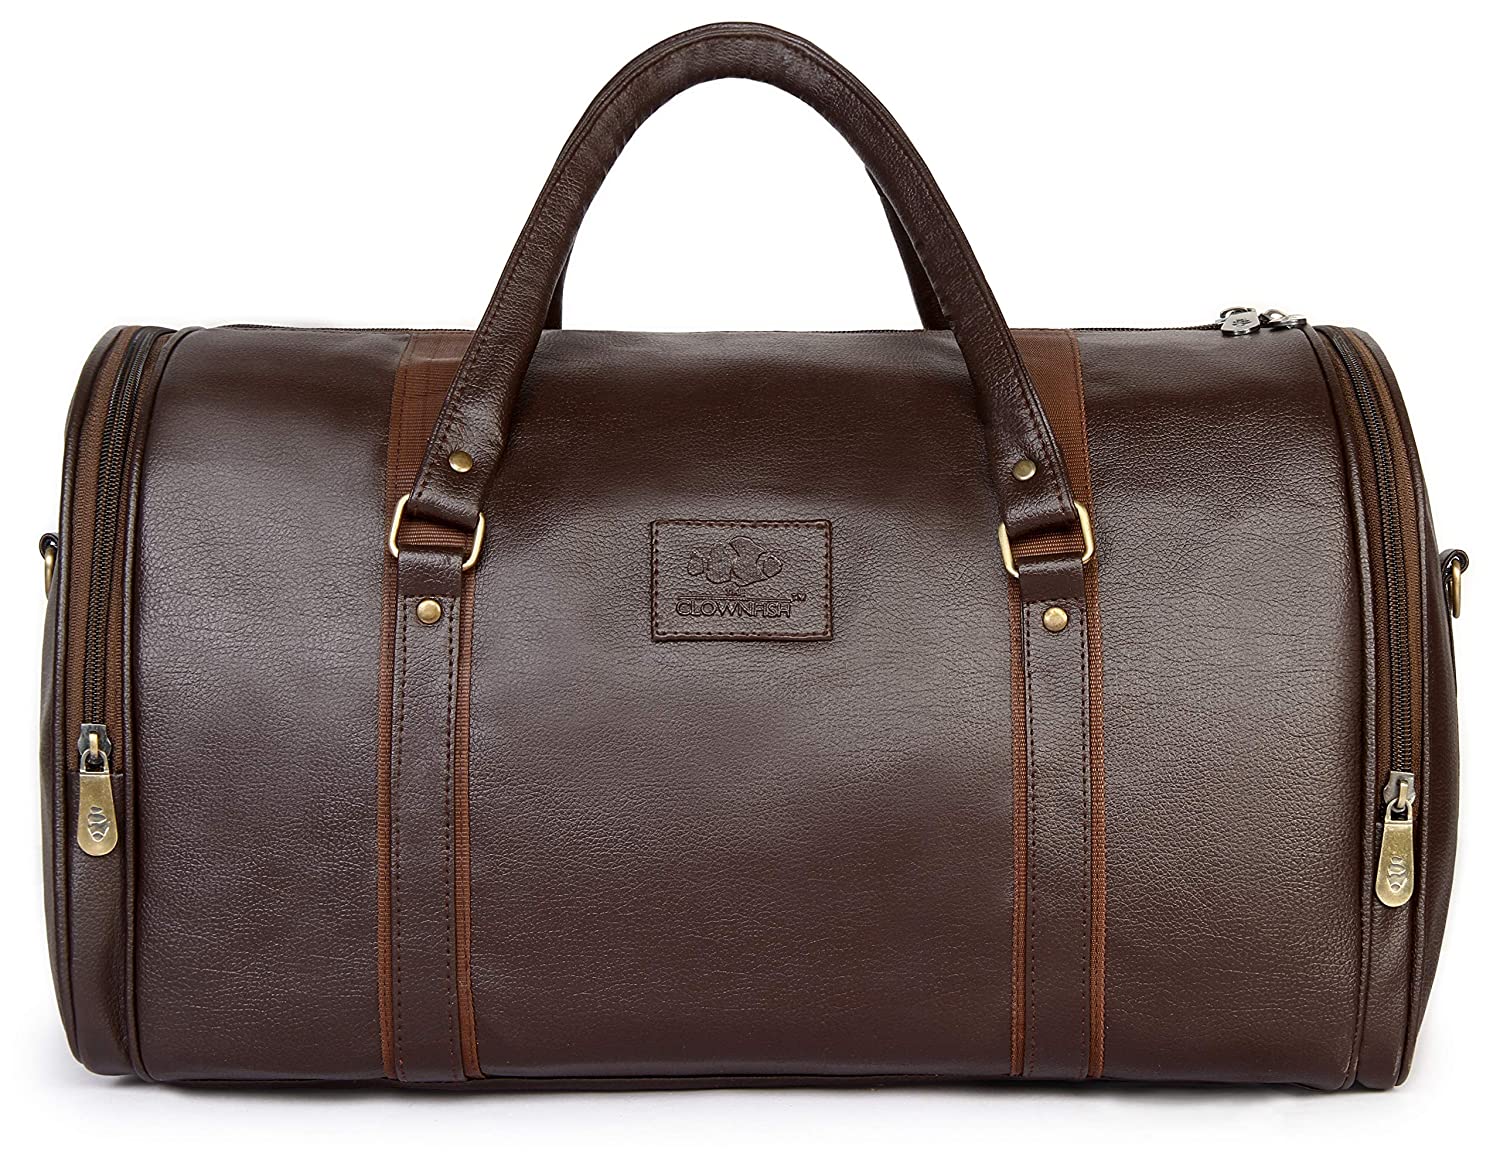 The Clownfish Faux Leather Travel Duffle